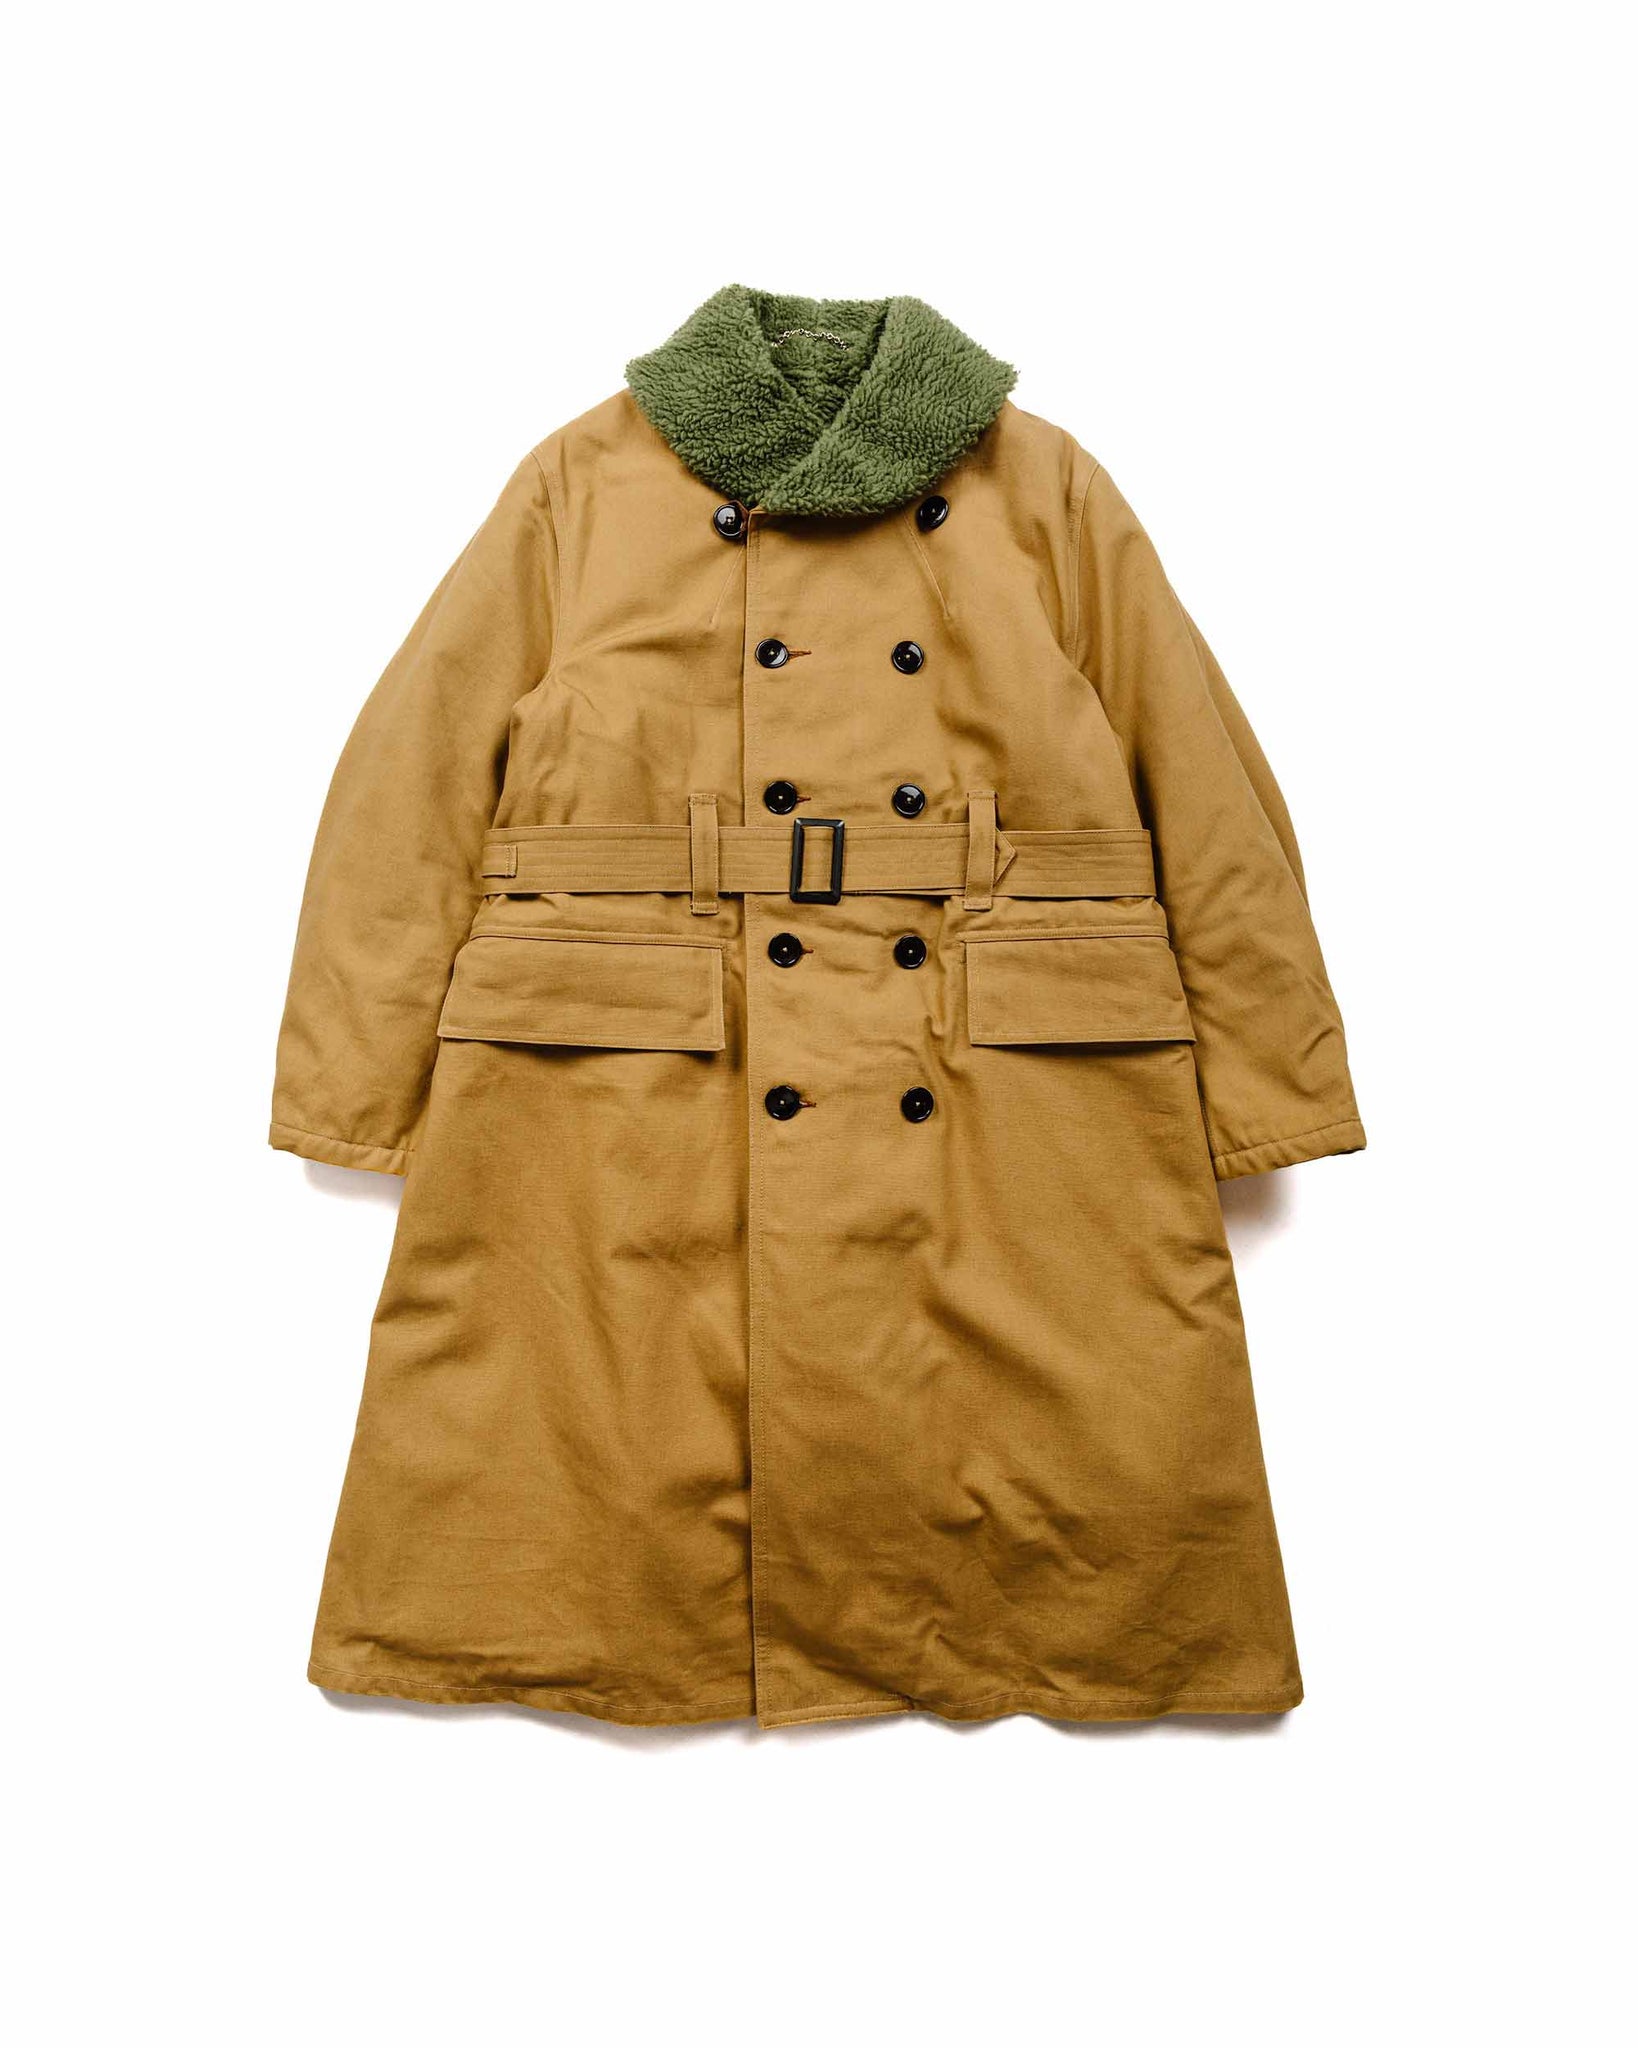 The Real McCoy's for Lost & Found OJ21101 Jeep Coat